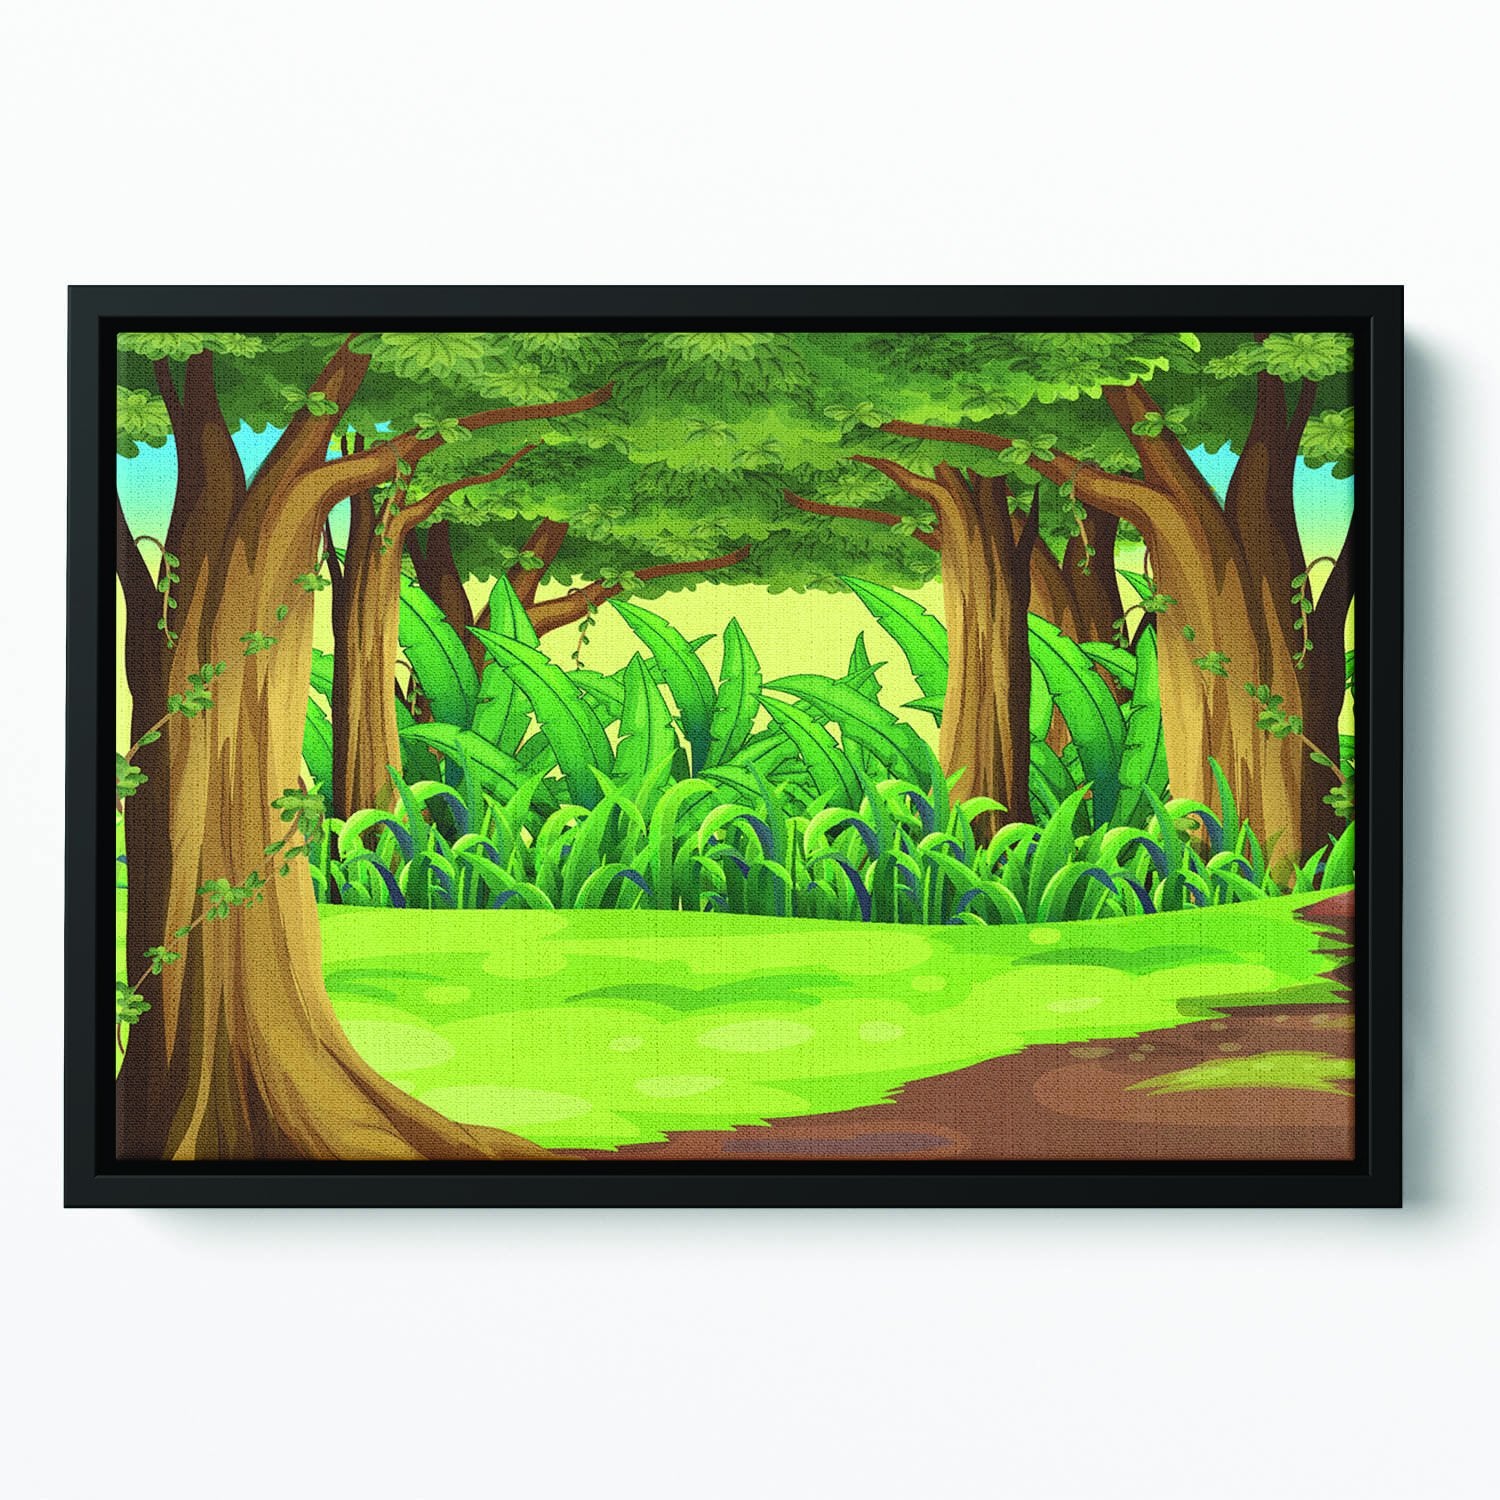 Illustration of the giant trees in the forest Floating Framed Canvas